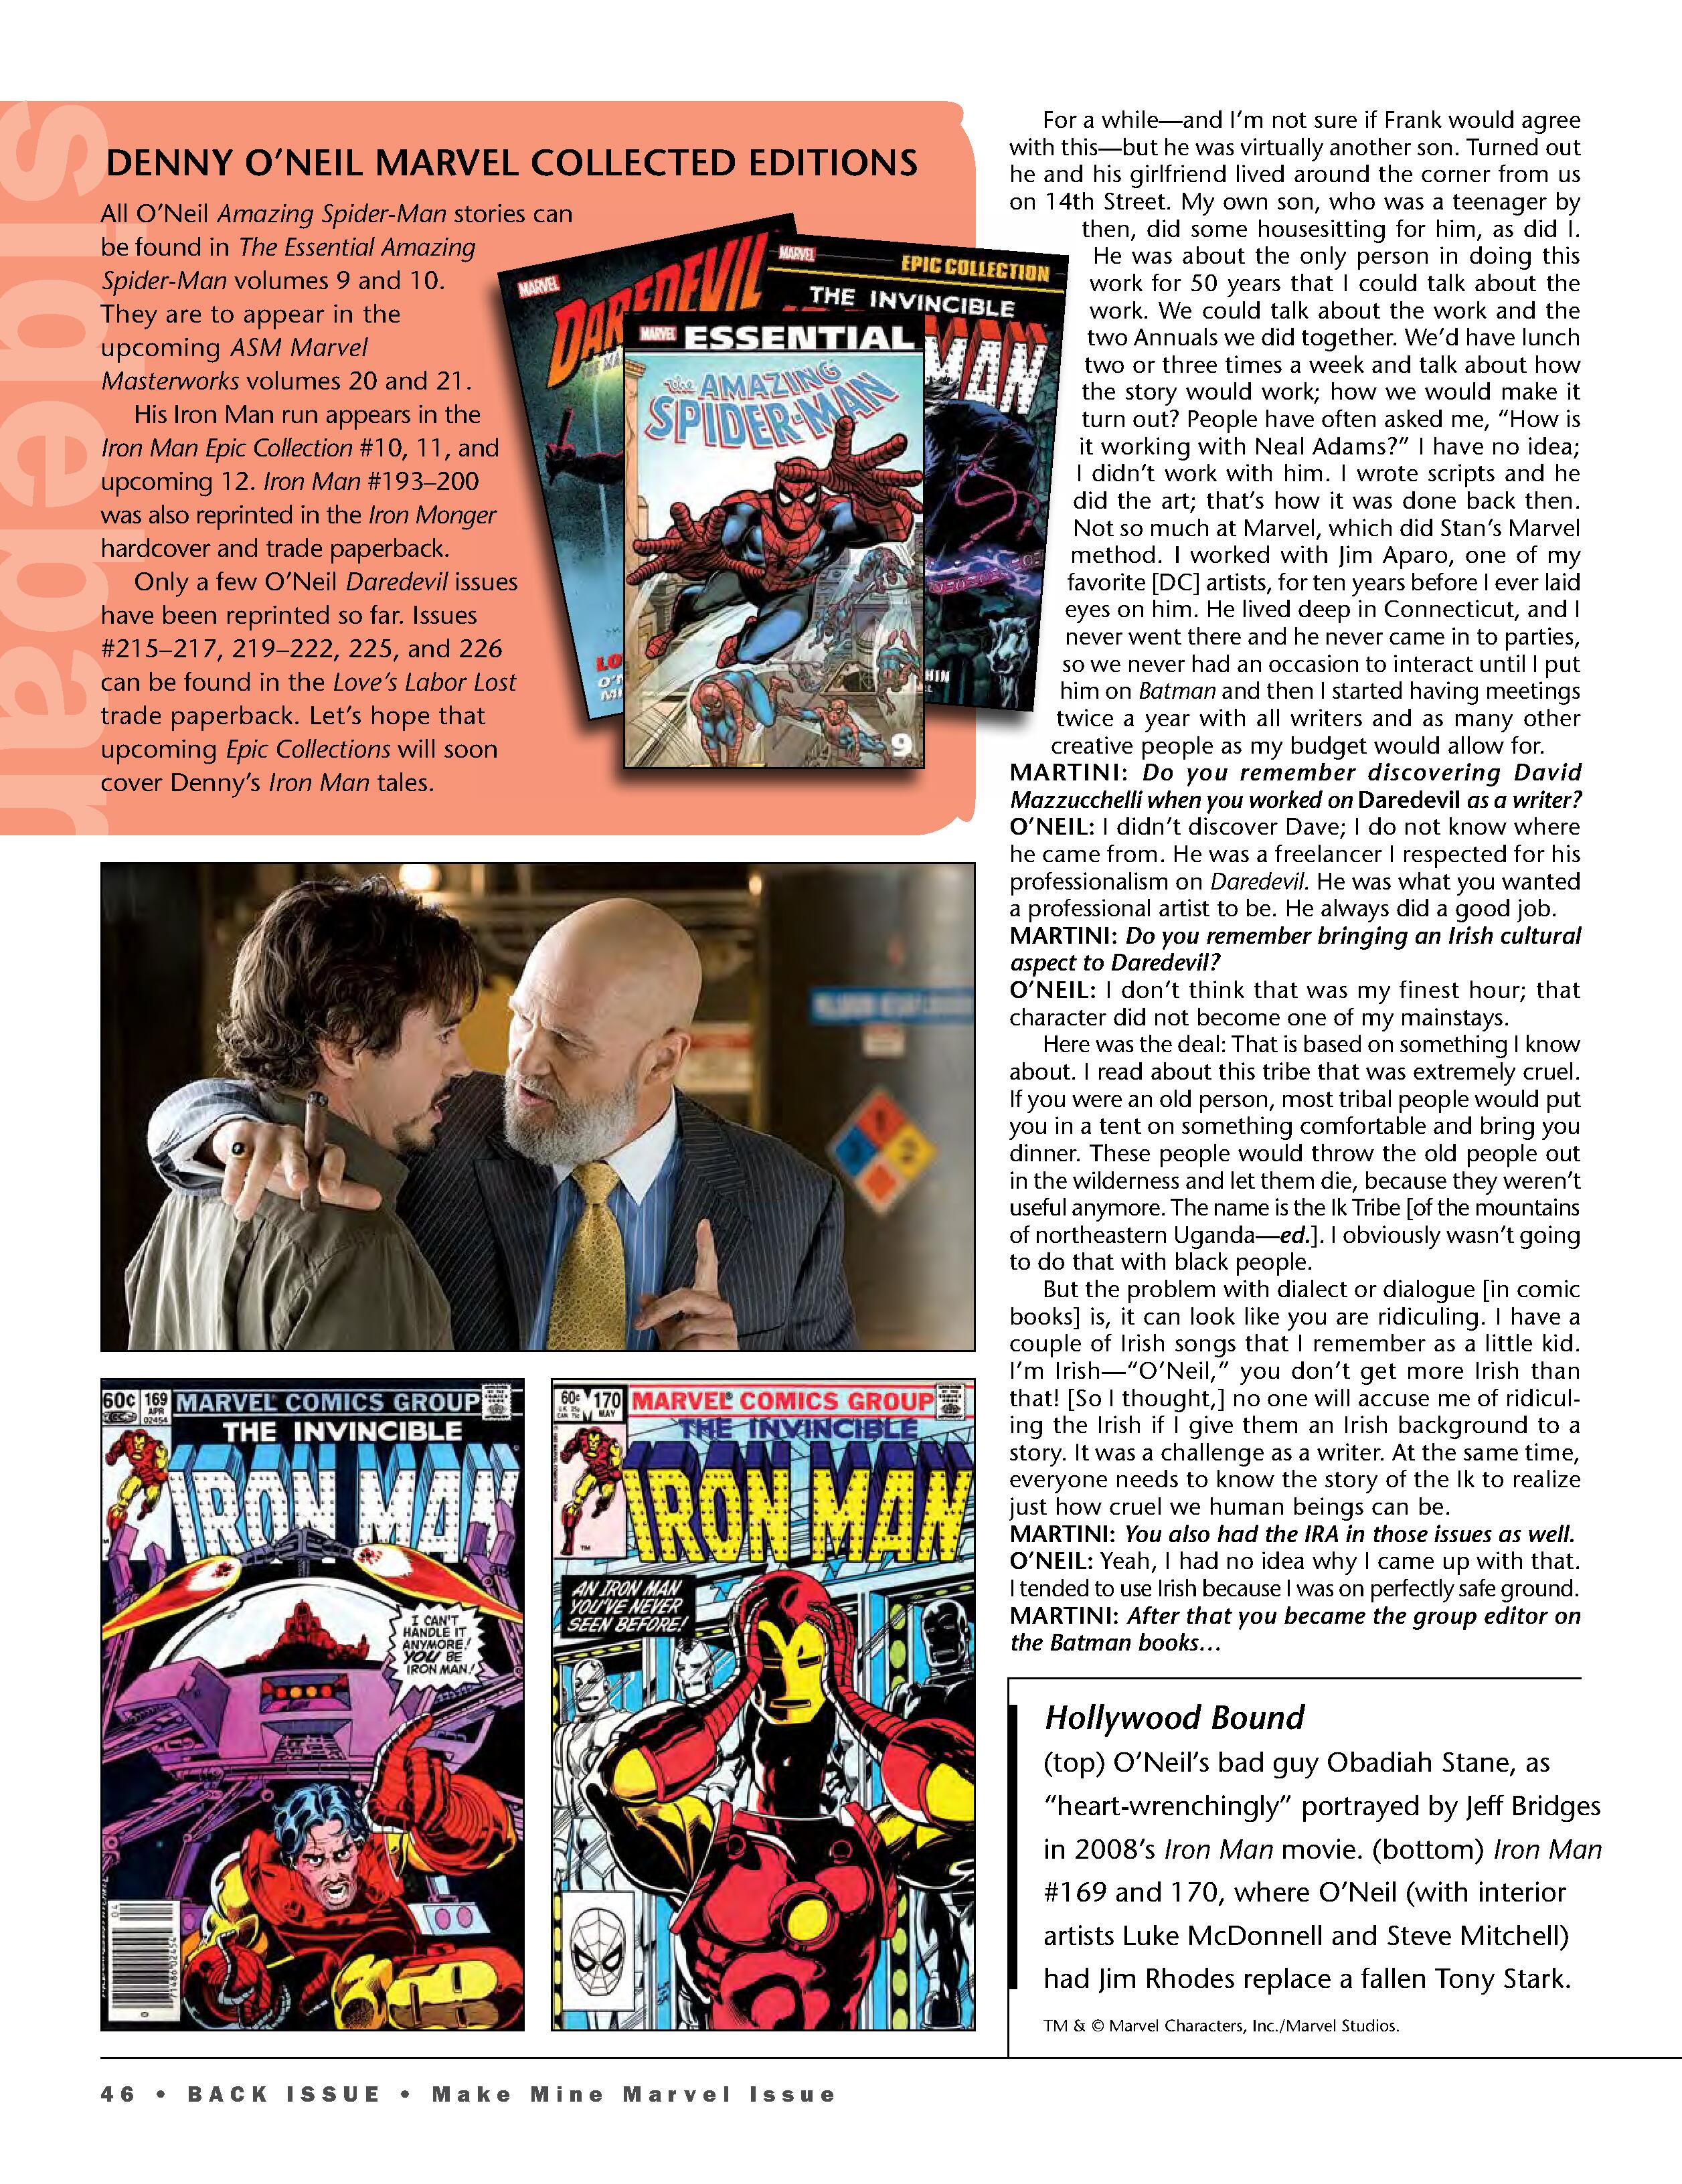 Read online Back Issue comic -  Issue #110 - 48